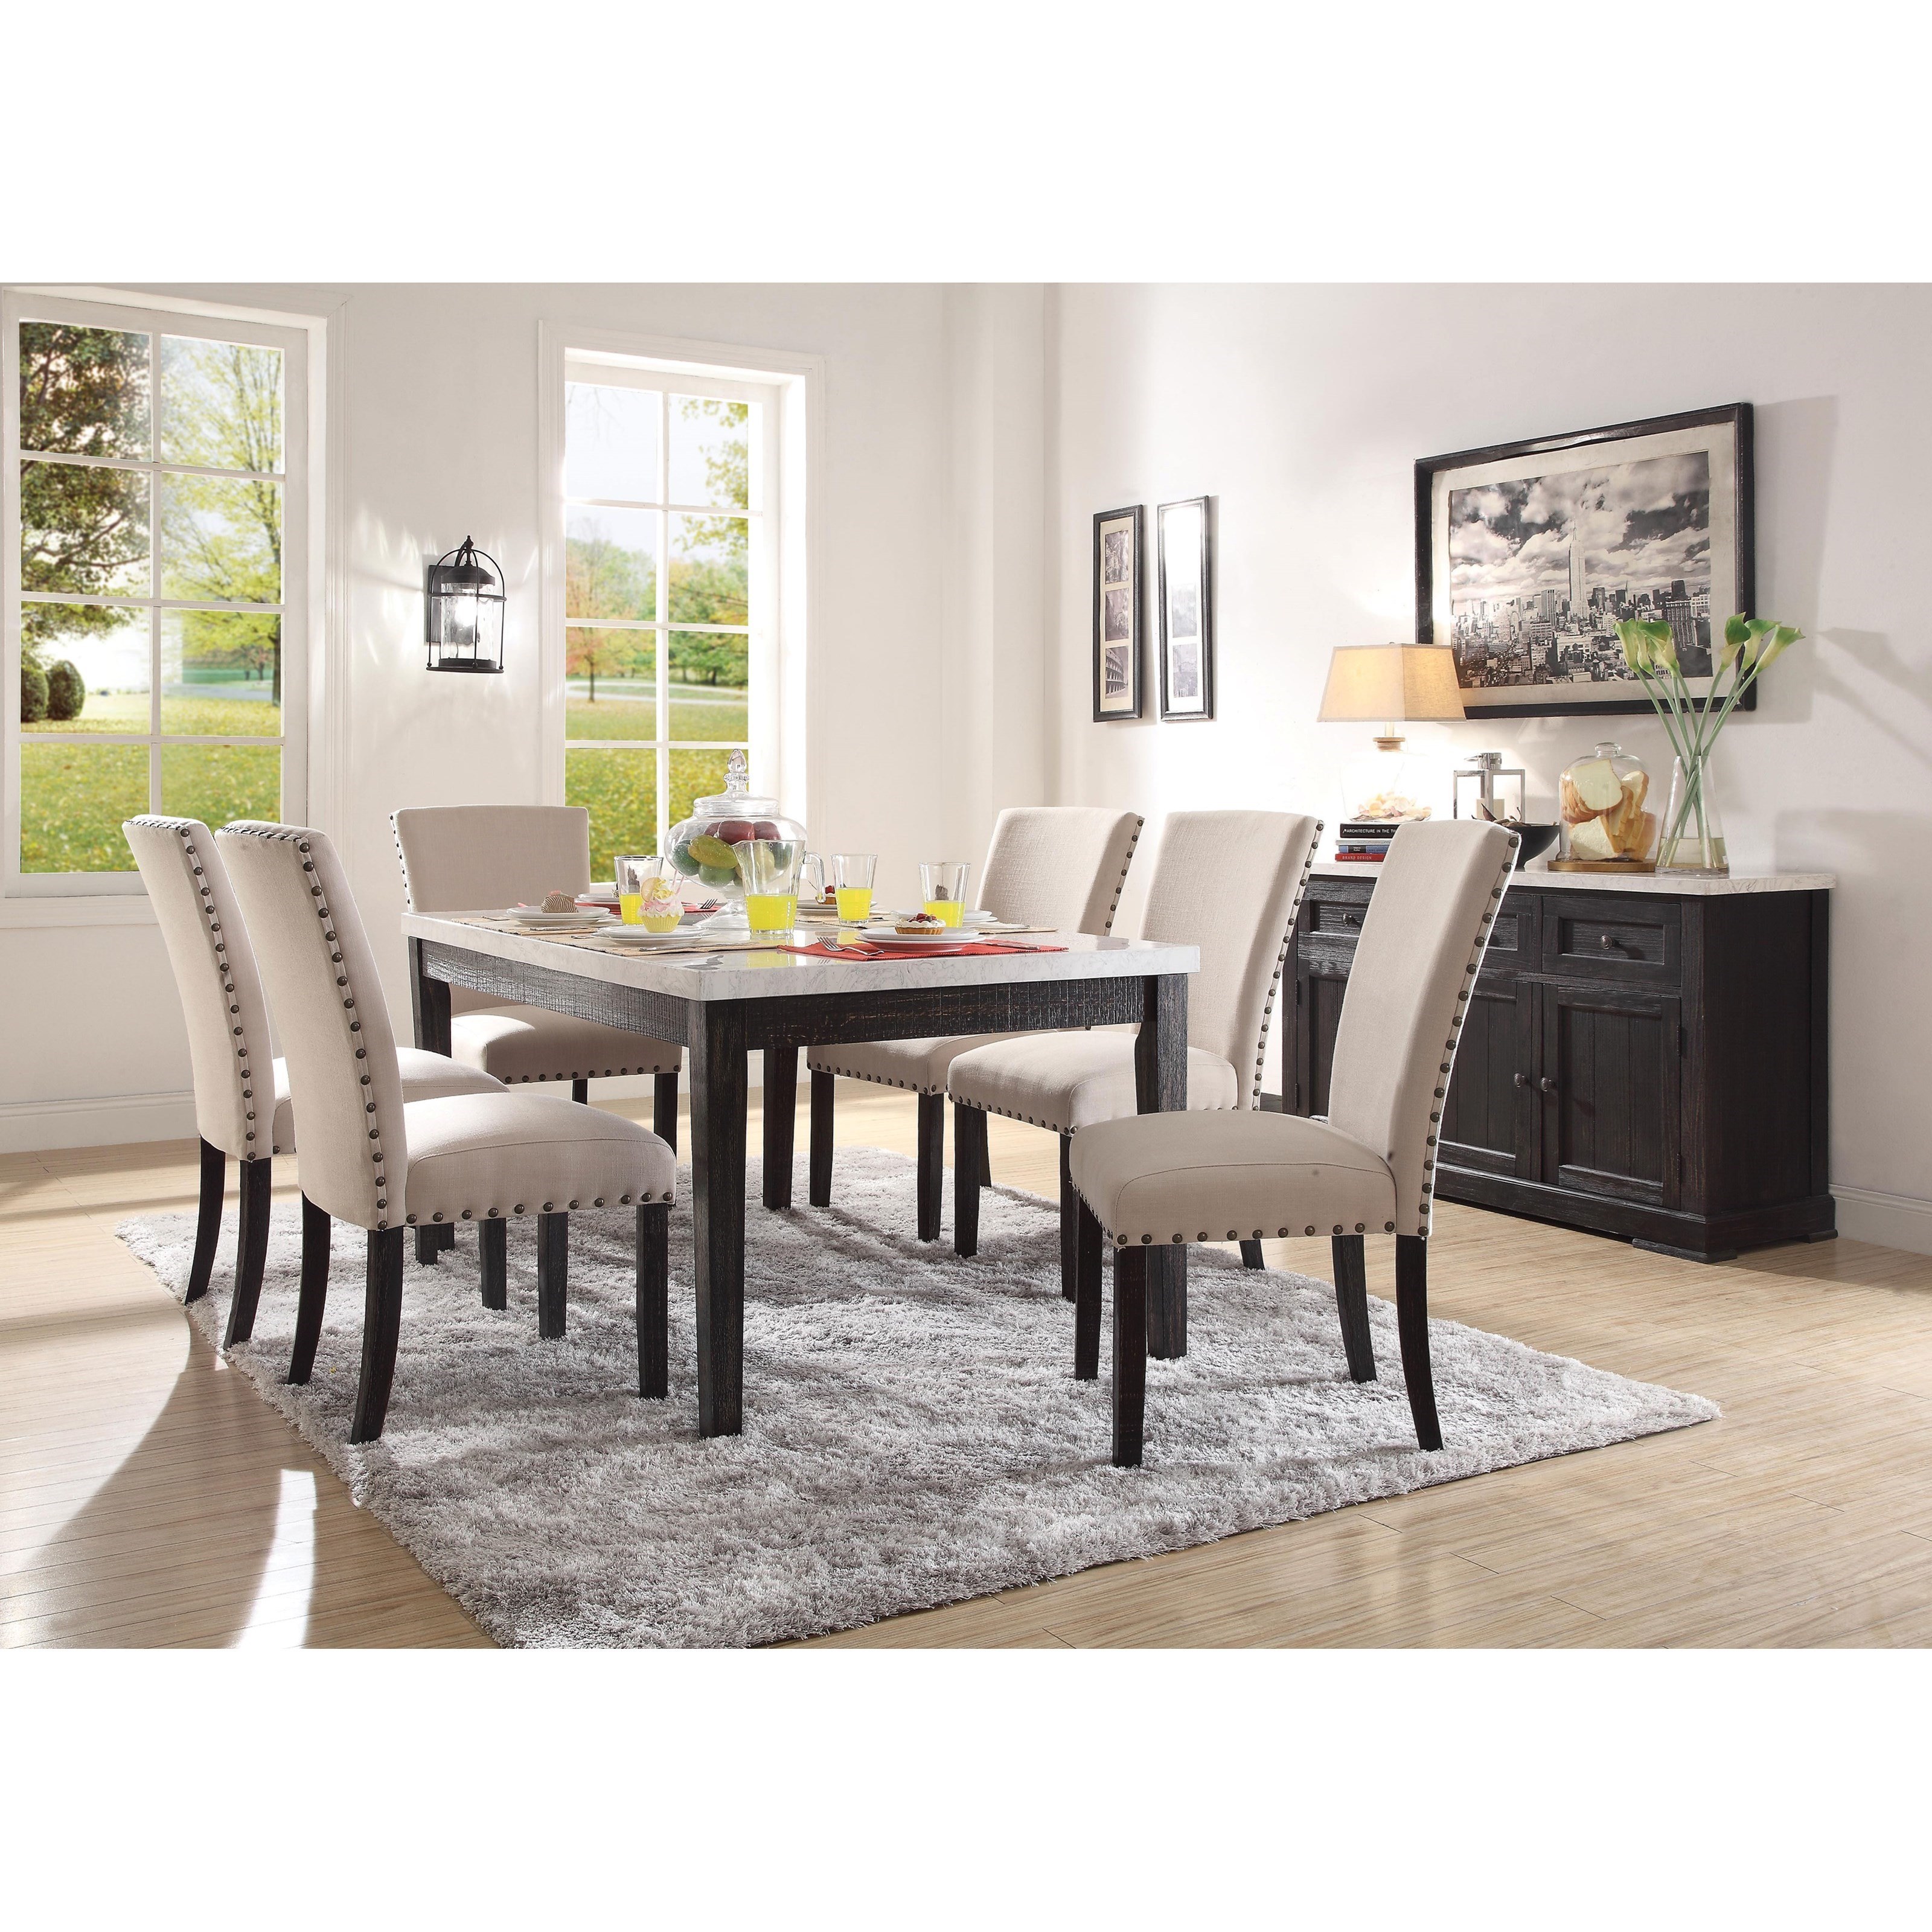 Acme Furniture Nolan Rectangular Dining Table with White Marble 